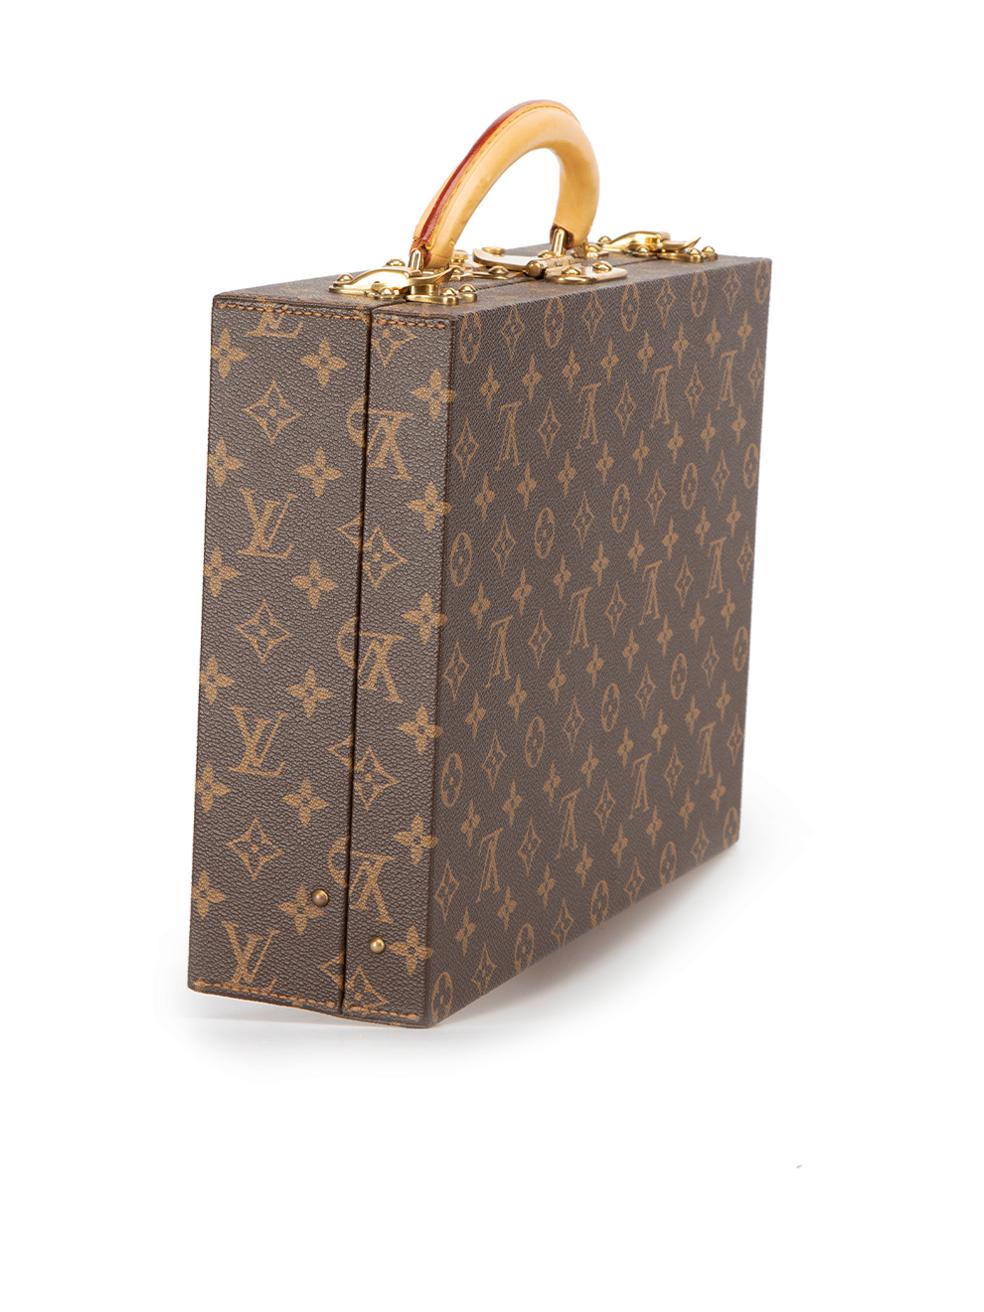 CONDITION is Very good. Minimal wear to case is evident. Minimal wear to the hardware with tarnishing to the gold on this used Louis Vuitton designer resale item.

Details


Brown

Coated canvas

Briefcase style jewellery case

Monogram LV